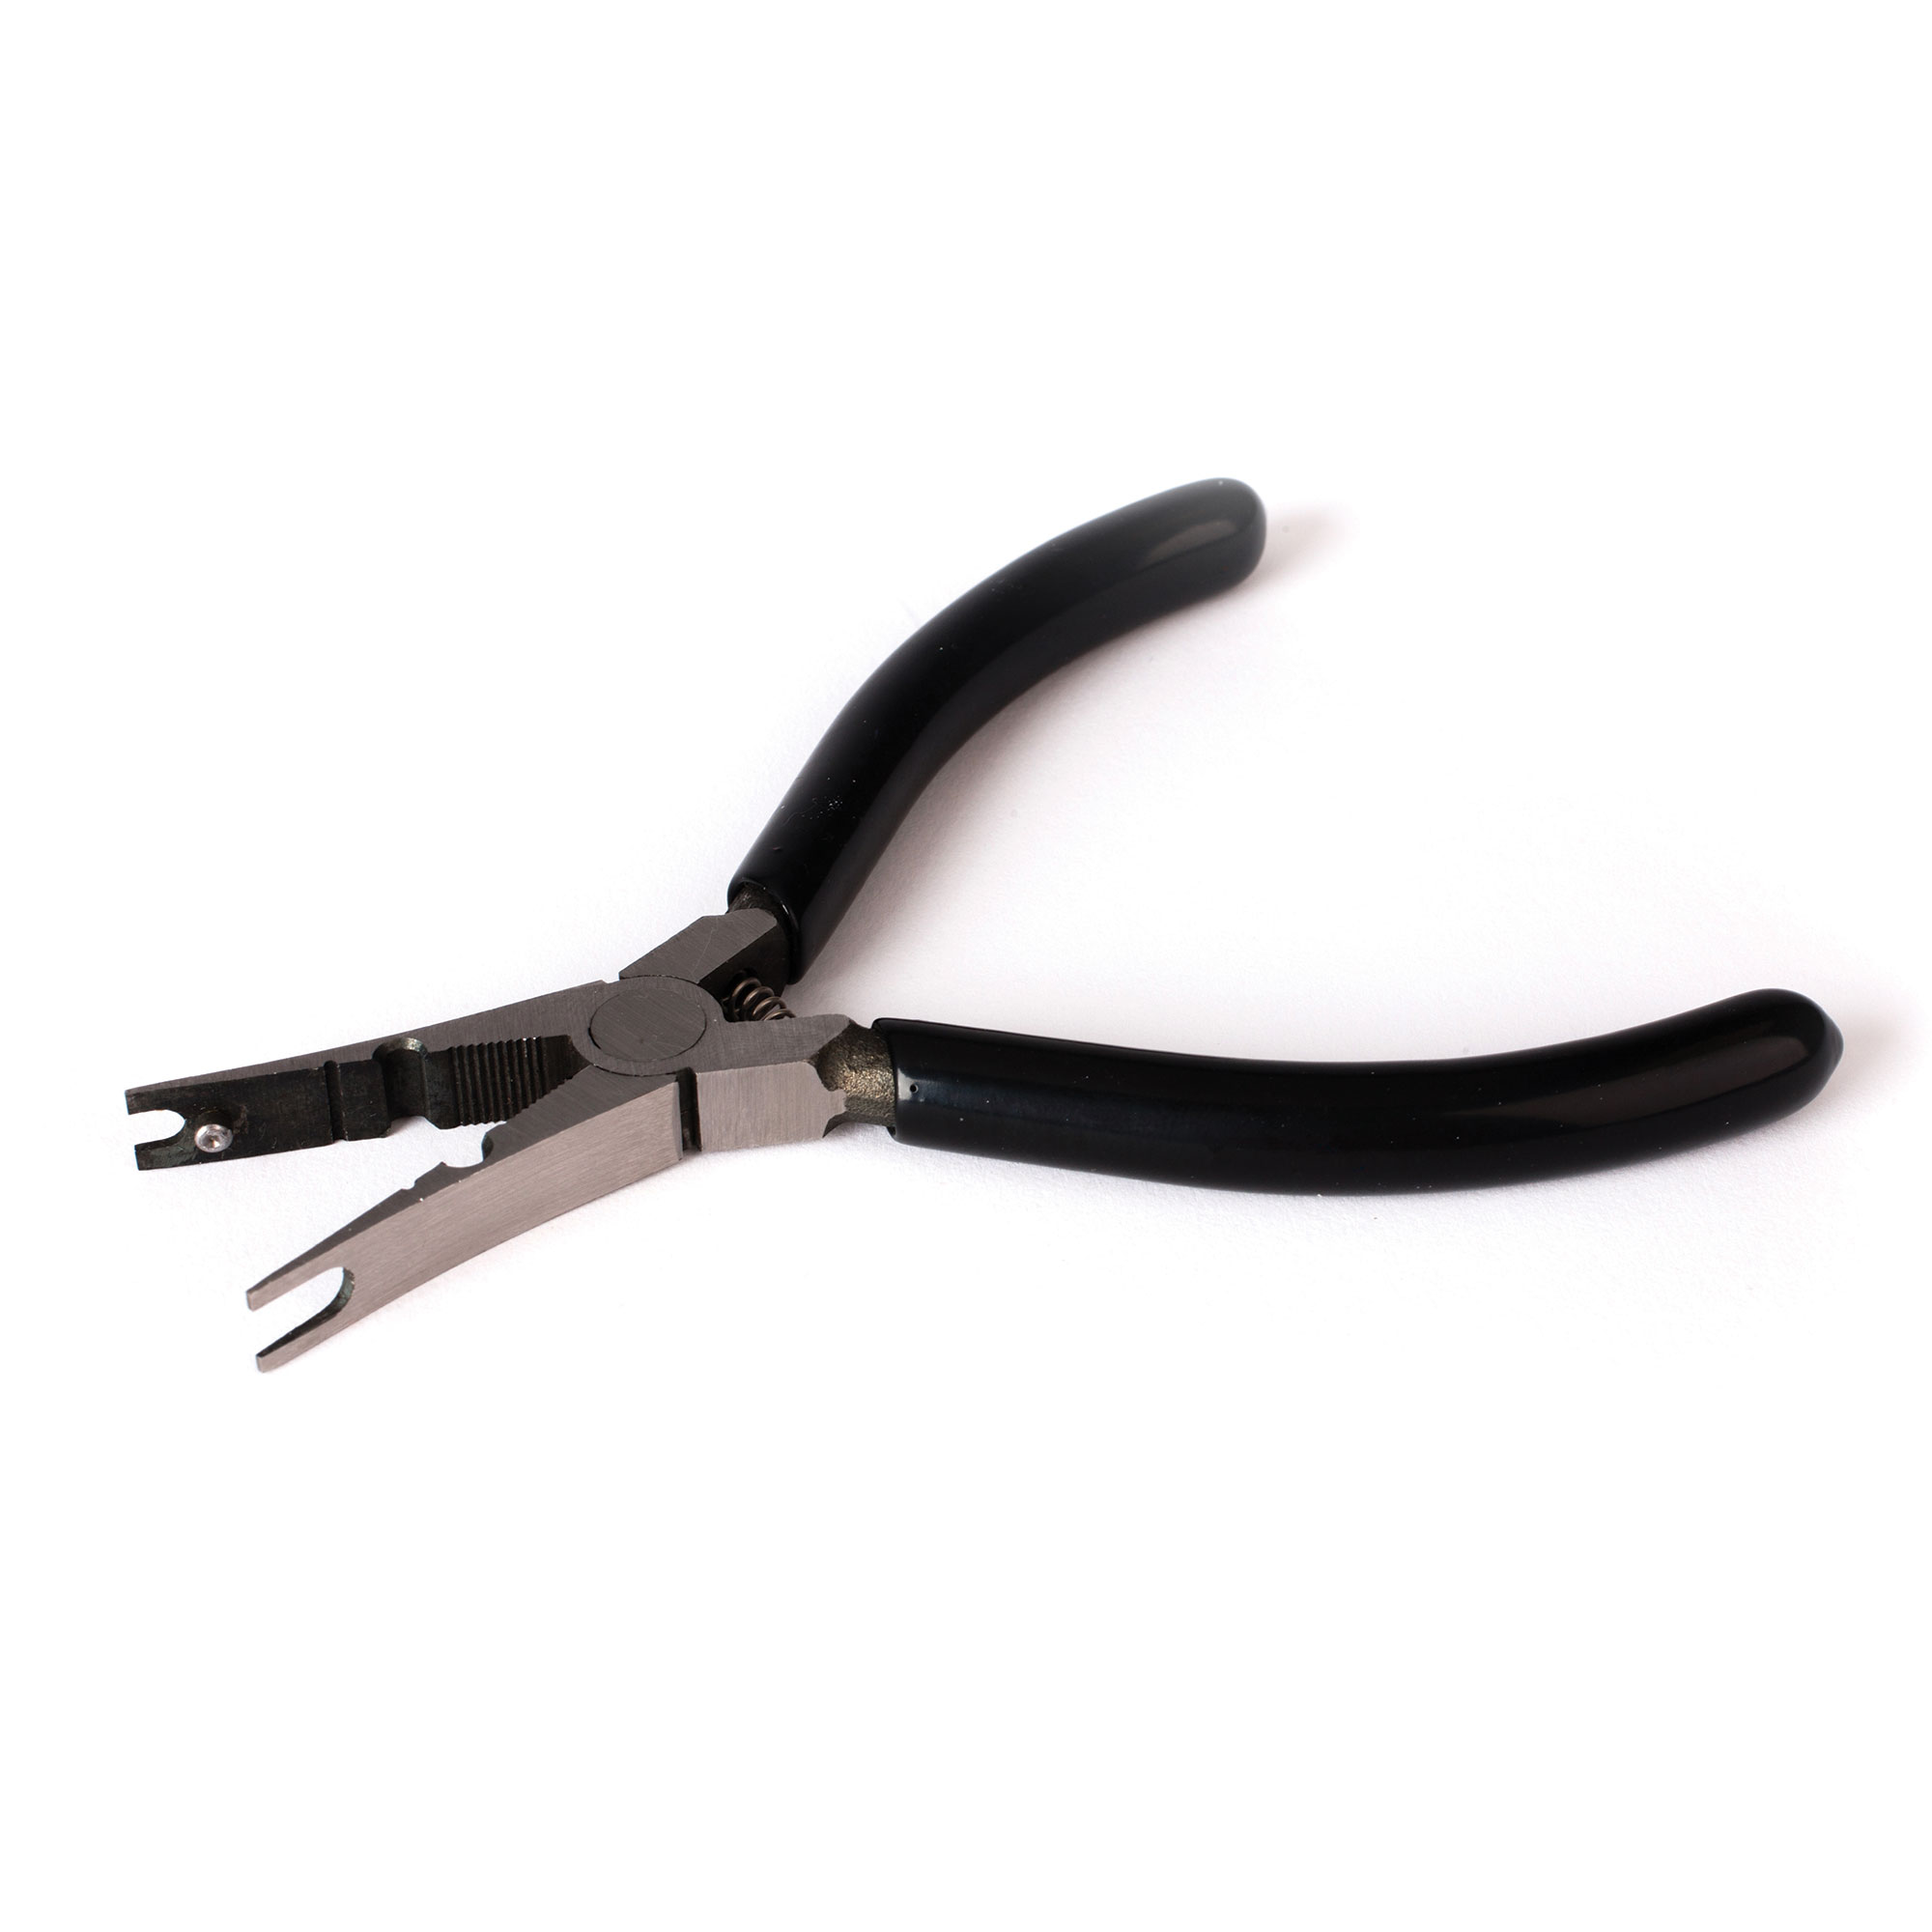 Align Ball Link Pliers K10338A 